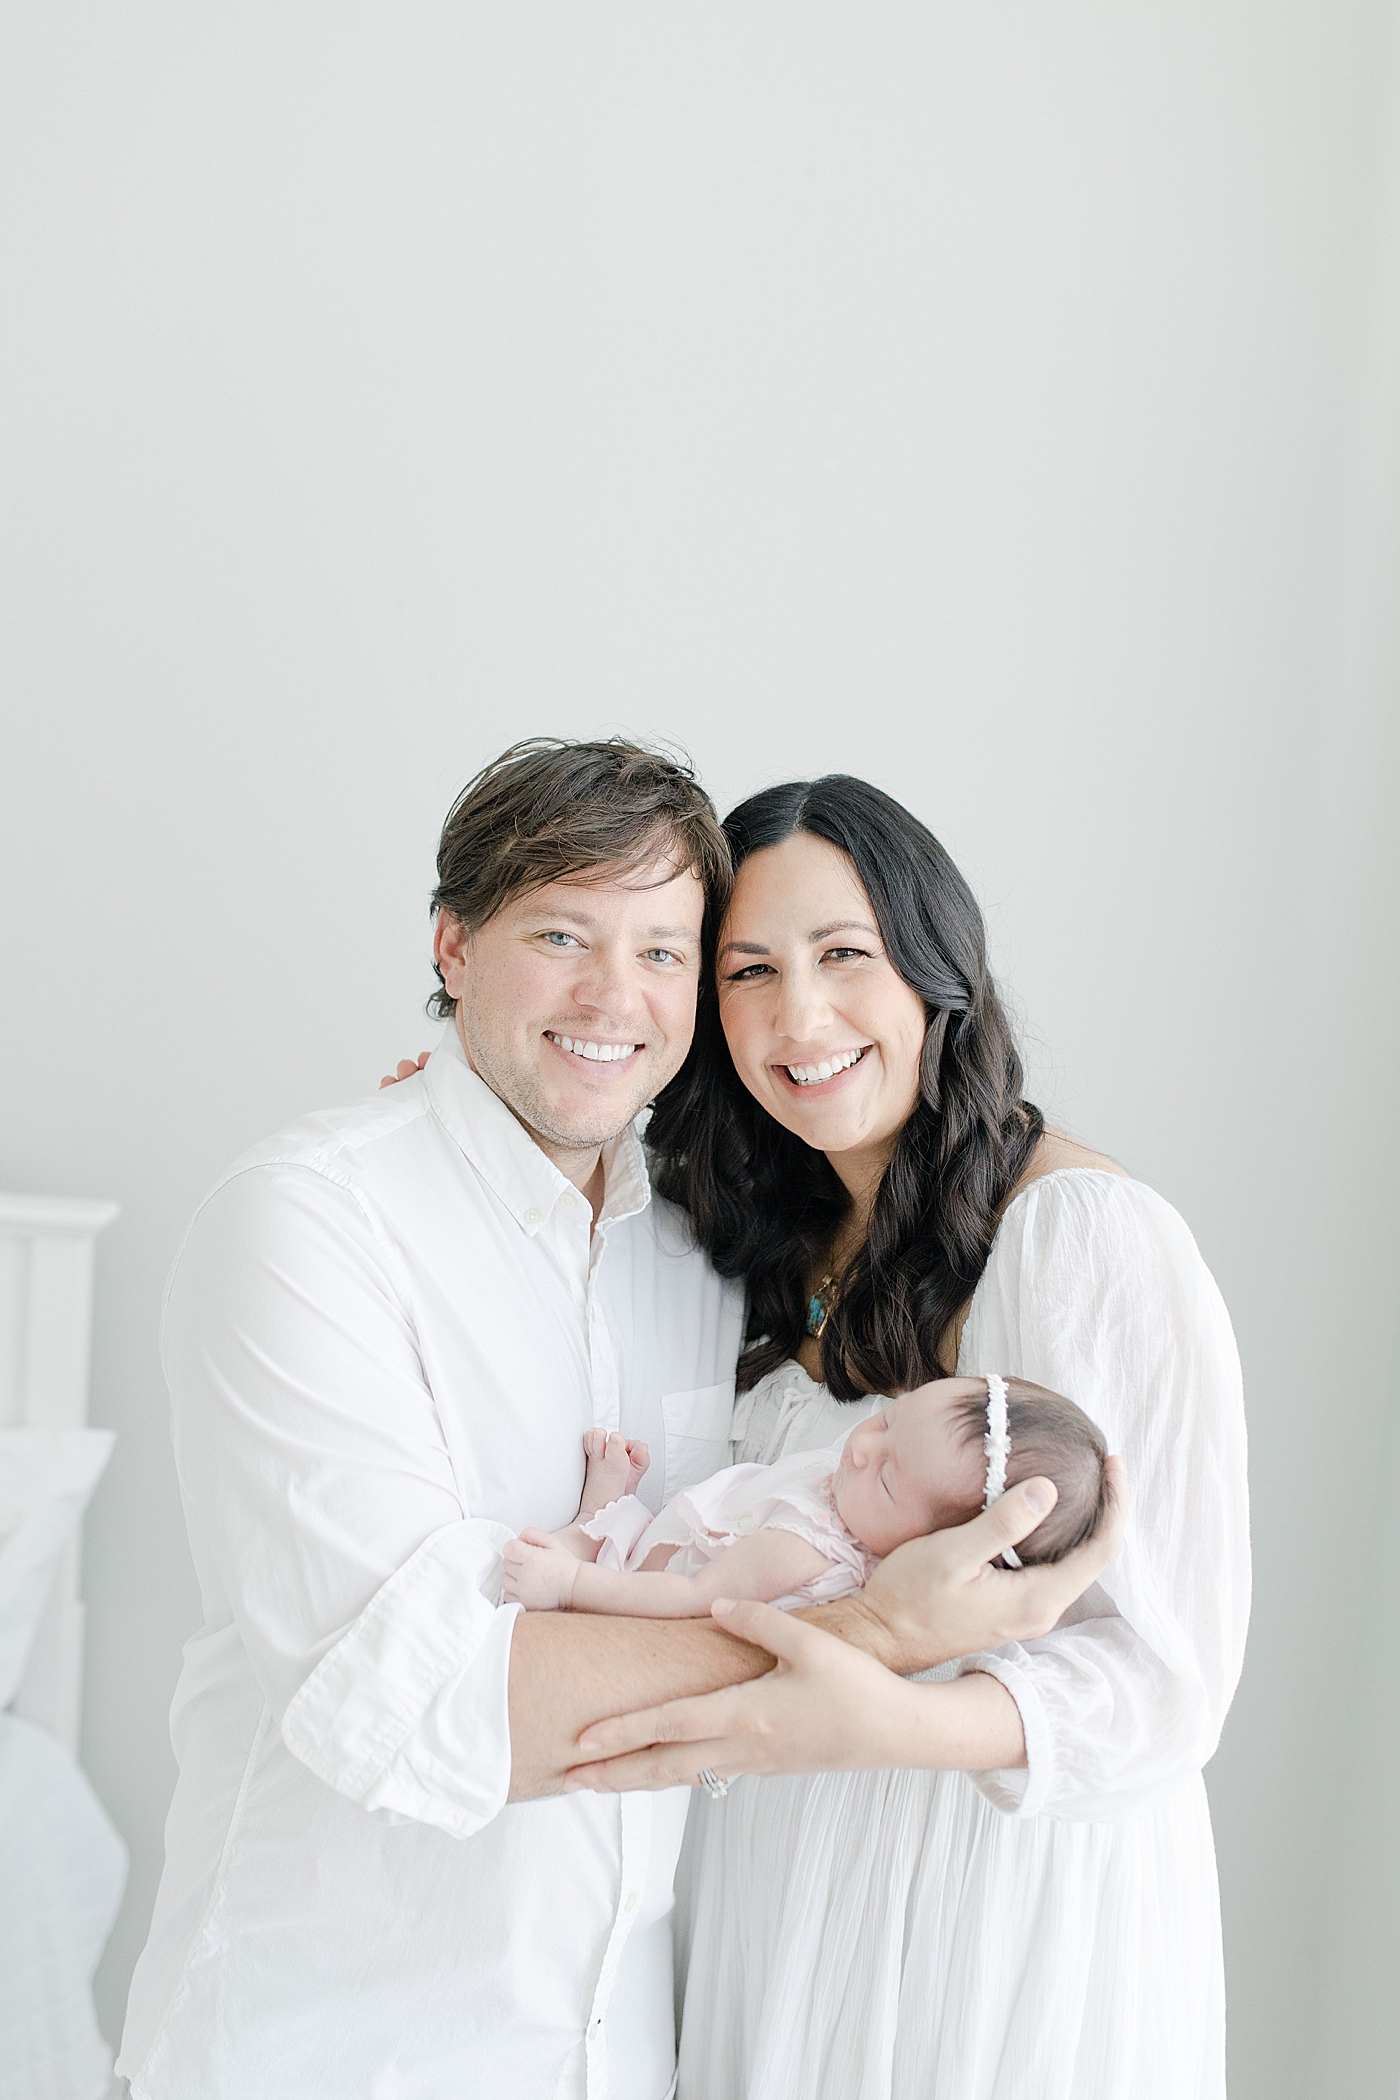 First family portrait of Mom, Dad and their newborn daughter. Photo by Little Sunshine Photography